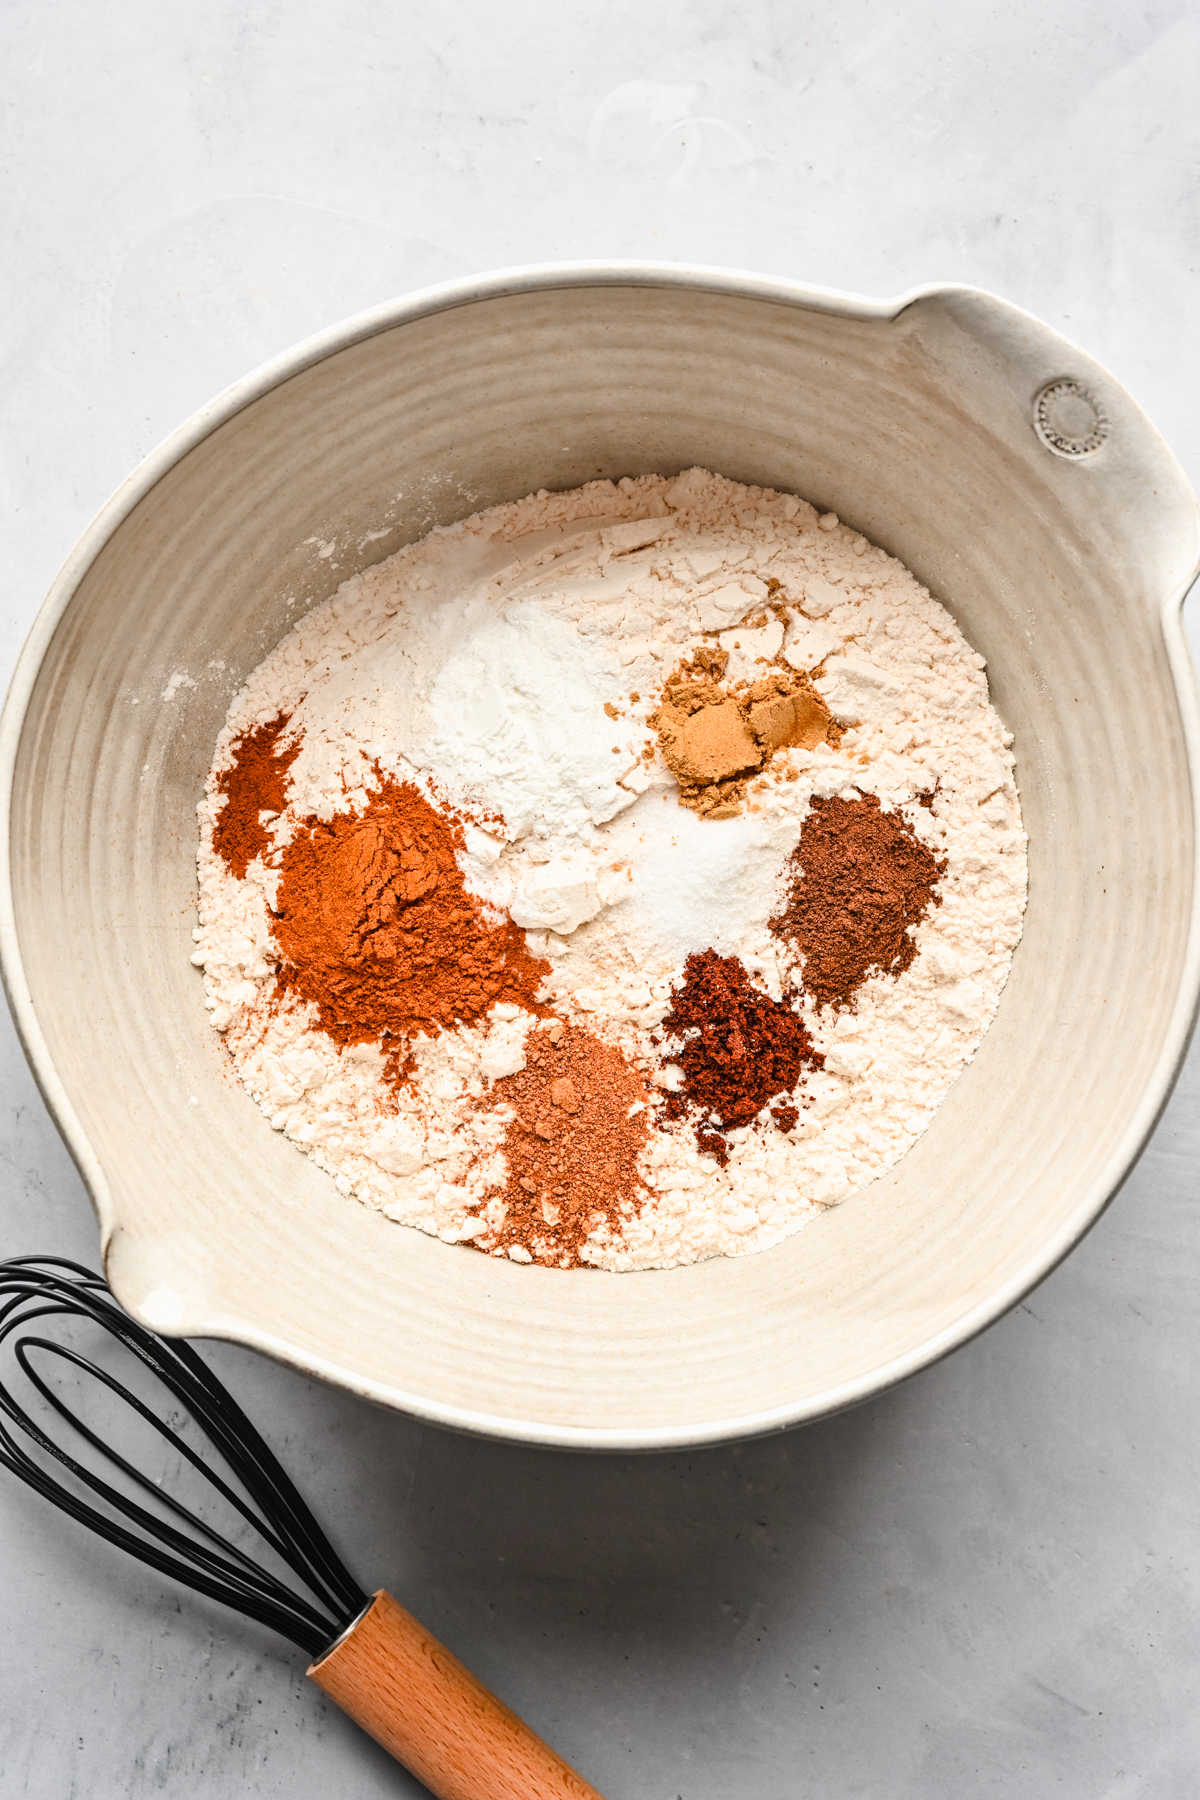 Dry ingredients for spice cake in a mixing bowl.